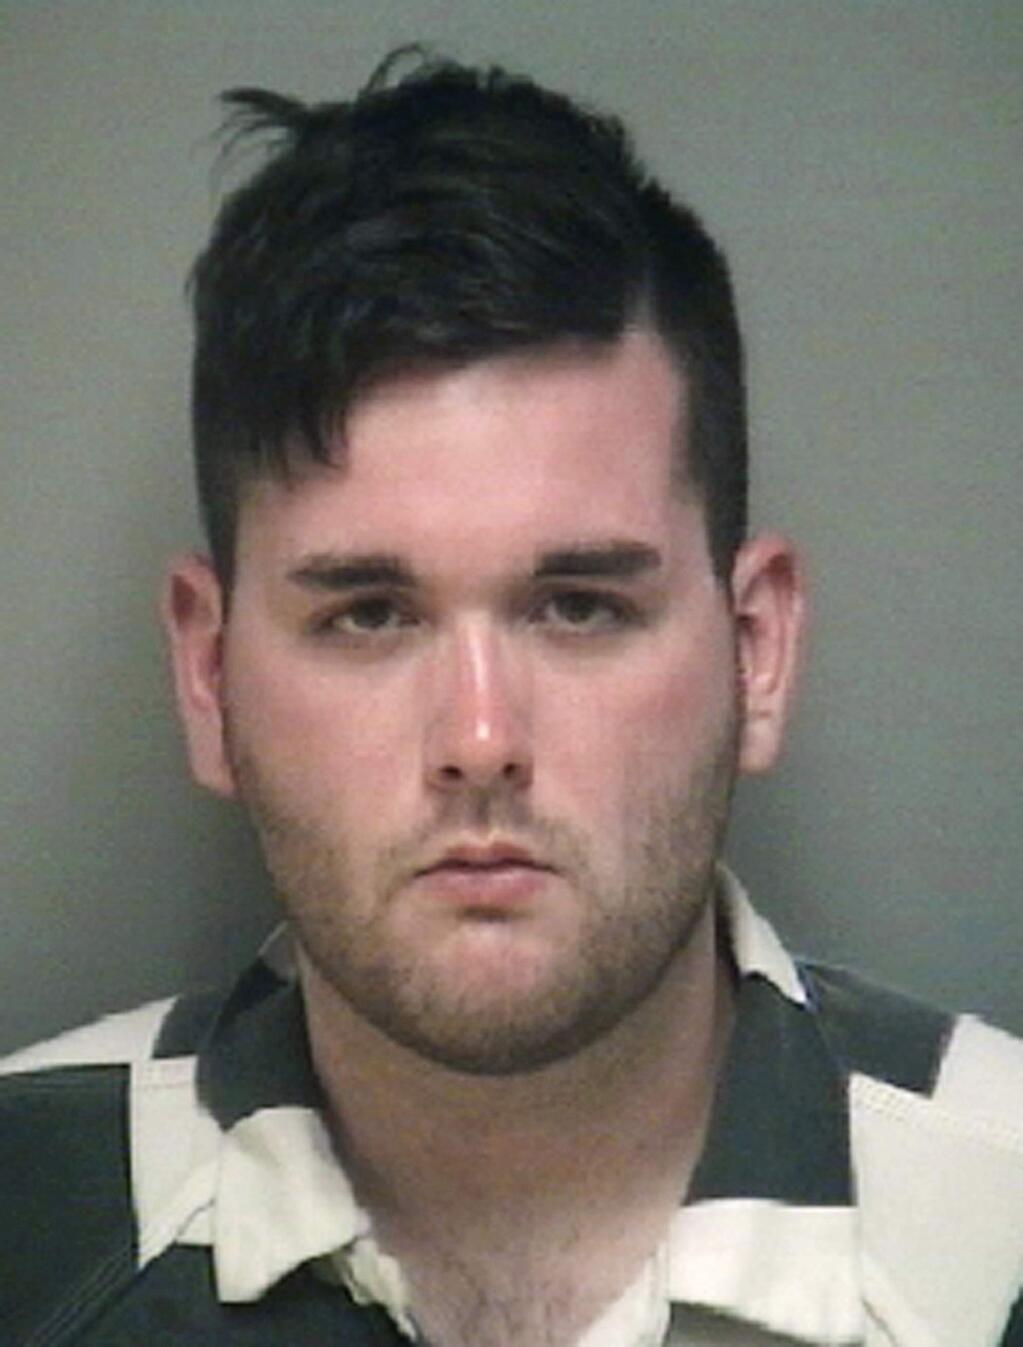 FILE - This undated file photo provided by the Albemarle-Charlottesville Regional Jail shows James Alex Fields Jr. Fields, convicted of first-degree murder for driving his car into counterprotesters at a white nationalist rally in Virginia faces 20 years to life in prison as jurors reconvene to consider his punishment. The panel that convicted Fields will hear more evidence Monday, Dec. 10, 2018, before recommending a sentence for Judge Richard Moore. (Albemarle-Charlottesville Regional Jail via AP, File)